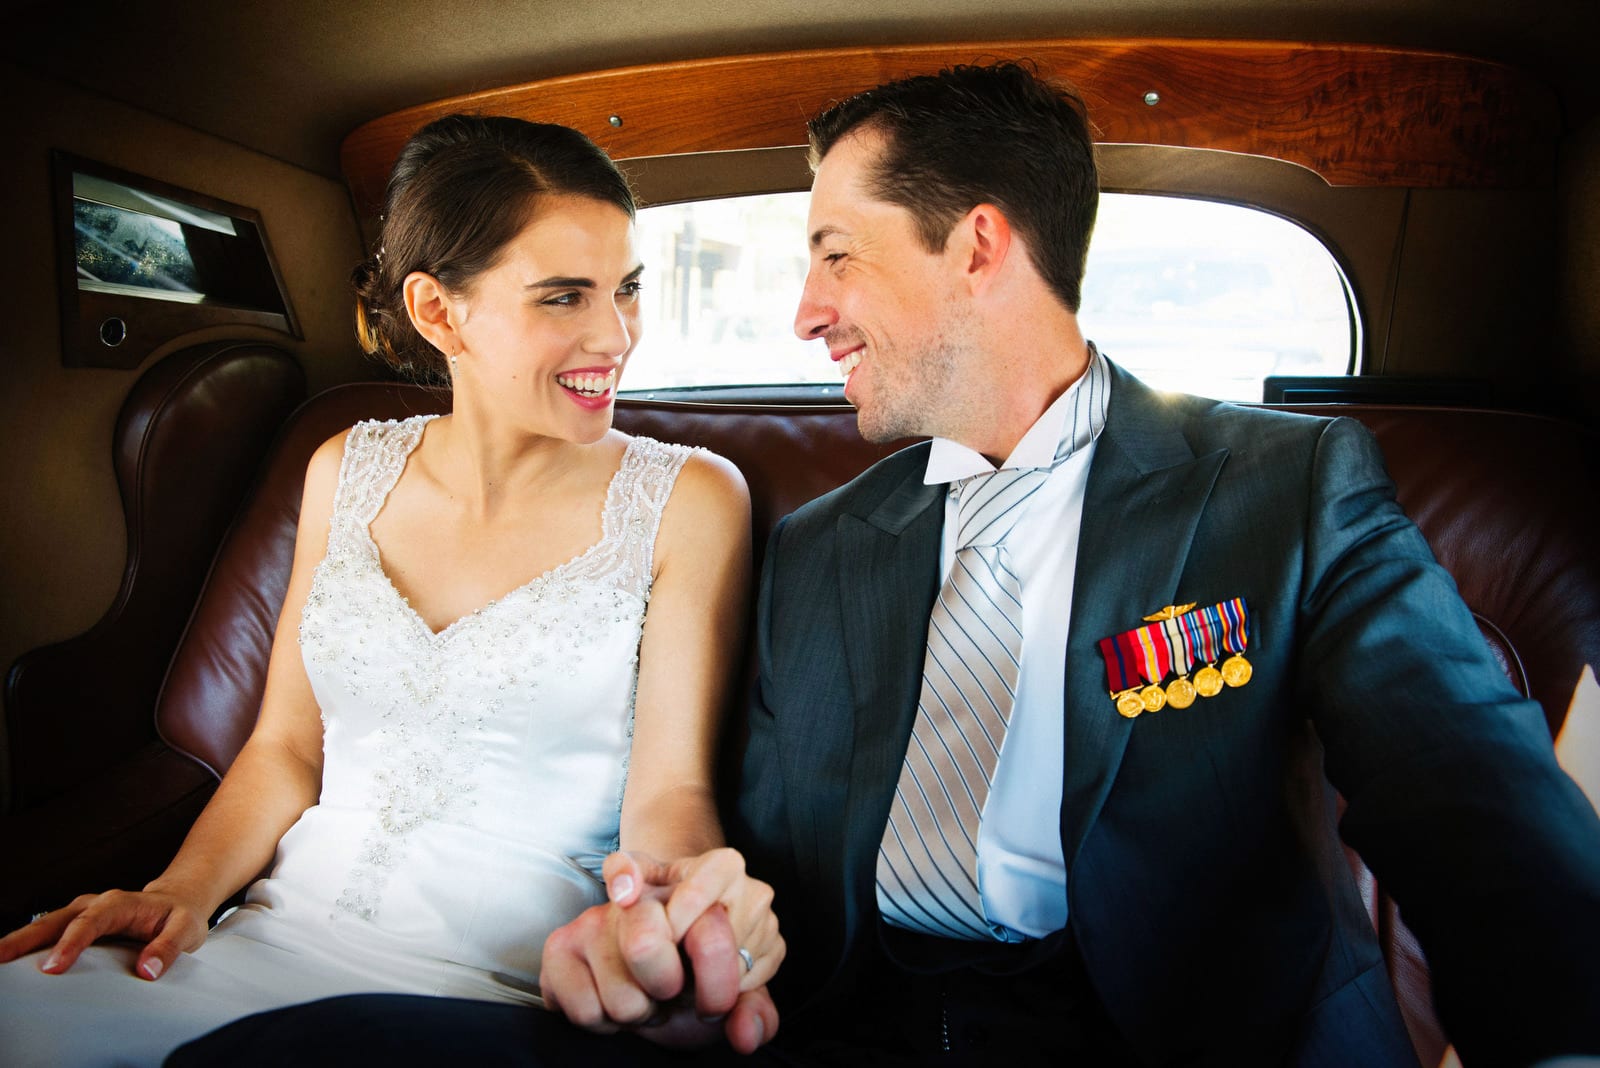 A bride and groom smile and hold hands in the back seat of a vintage Bentley limousine after their wedding at the Cathedral of St. Matthew the Apostle in Washington, DC.